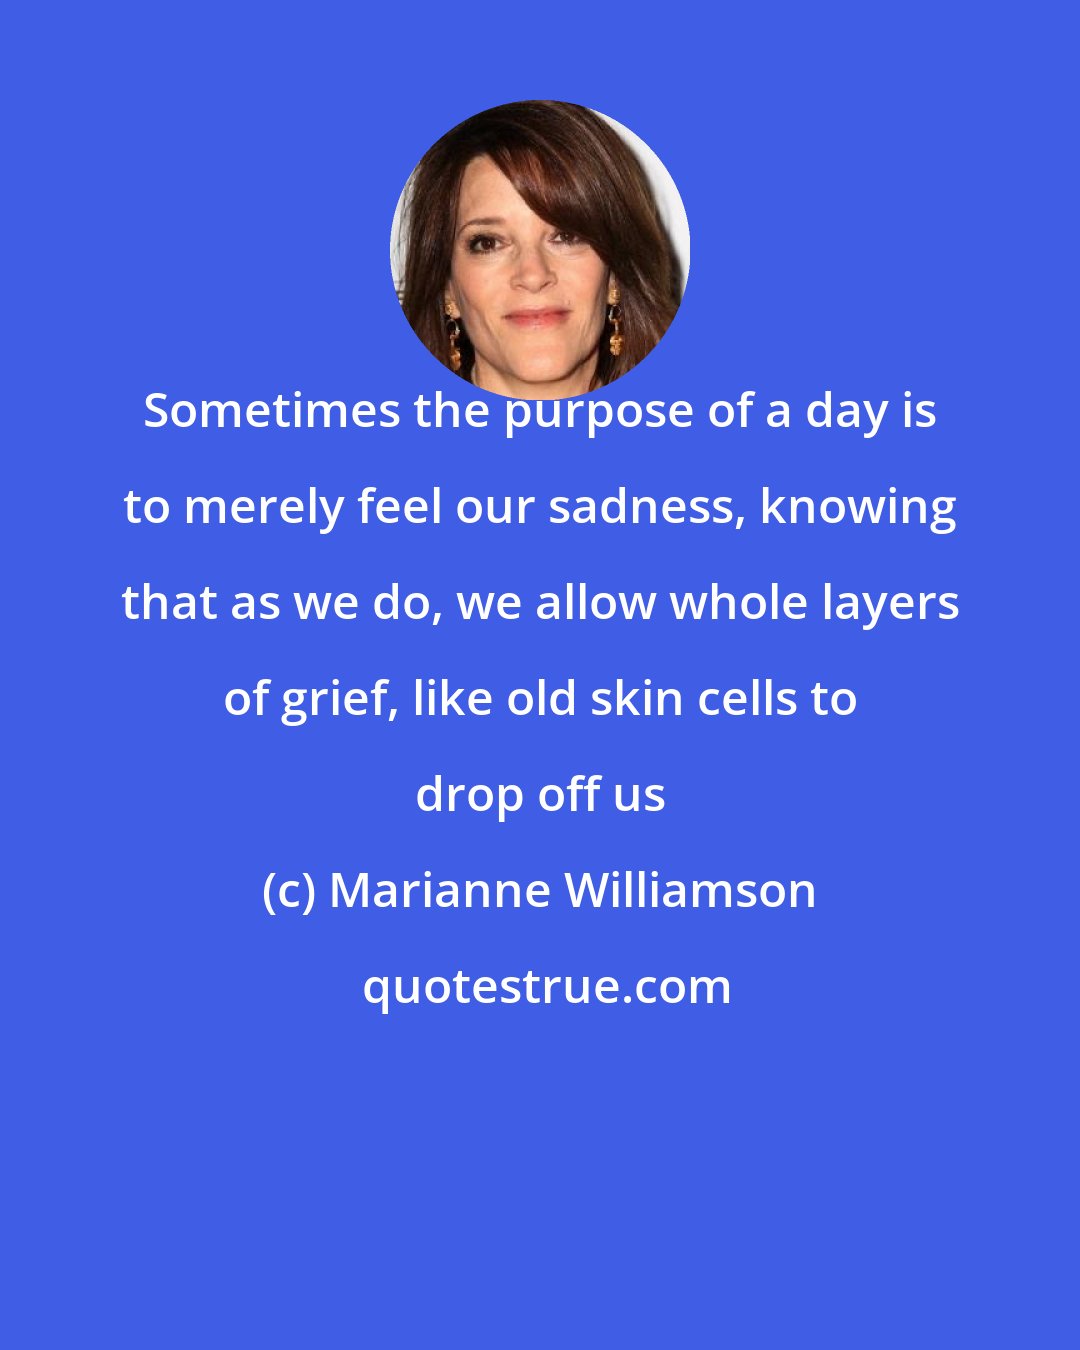 Marianne Williamson: Sometimes the purpose of a day is to merely feel our sadness, knowing that as we do, we allow whole layers of grief, like old skin cells to drop off us